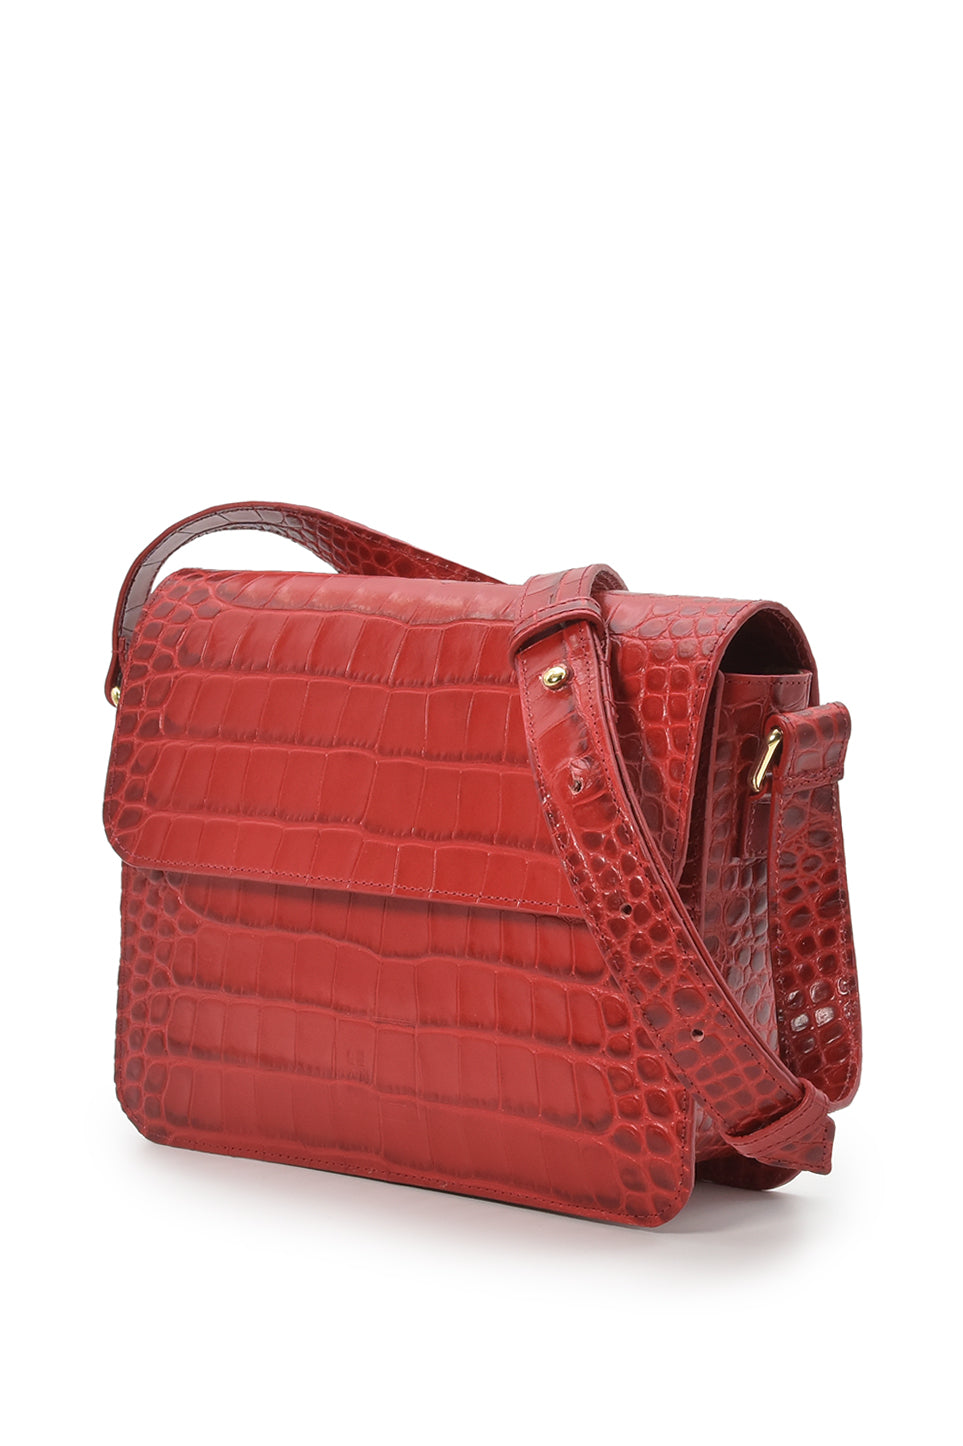 Square shoulder bag with printed red leather flap